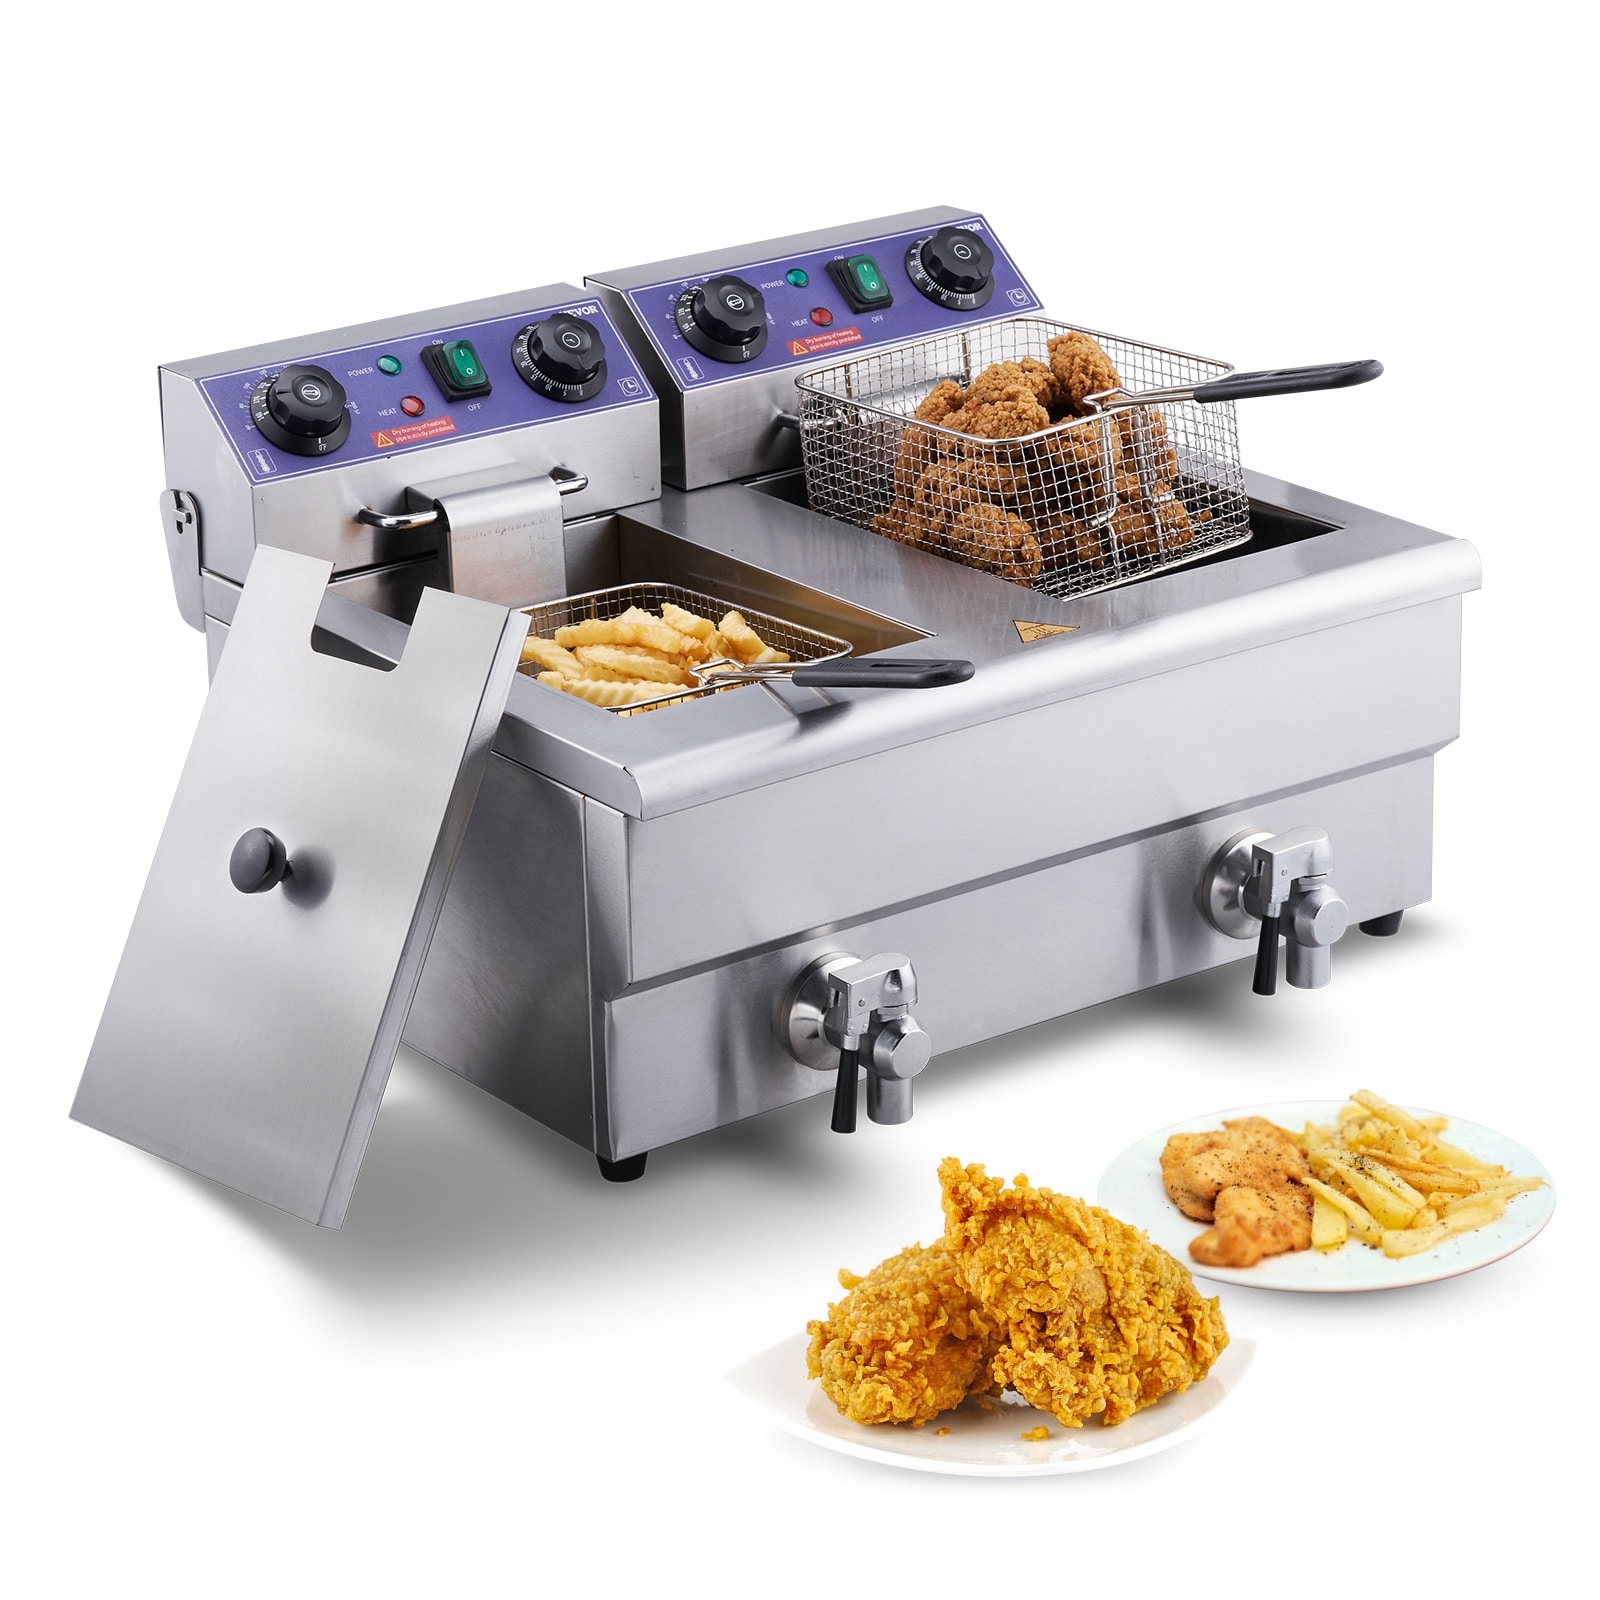 https://ak1.ostkcdn.com/images/products/is/images/direct/40199a28c4cadffb71f4c25e73c68823f079a3ca/VEVOR-Commercial-Electric-Deep-Fryer-24L-3000W-Dual-Basket-Stainless-Steel-Countertop-with-Time-Control-%26-Oil-Filtration.jpg